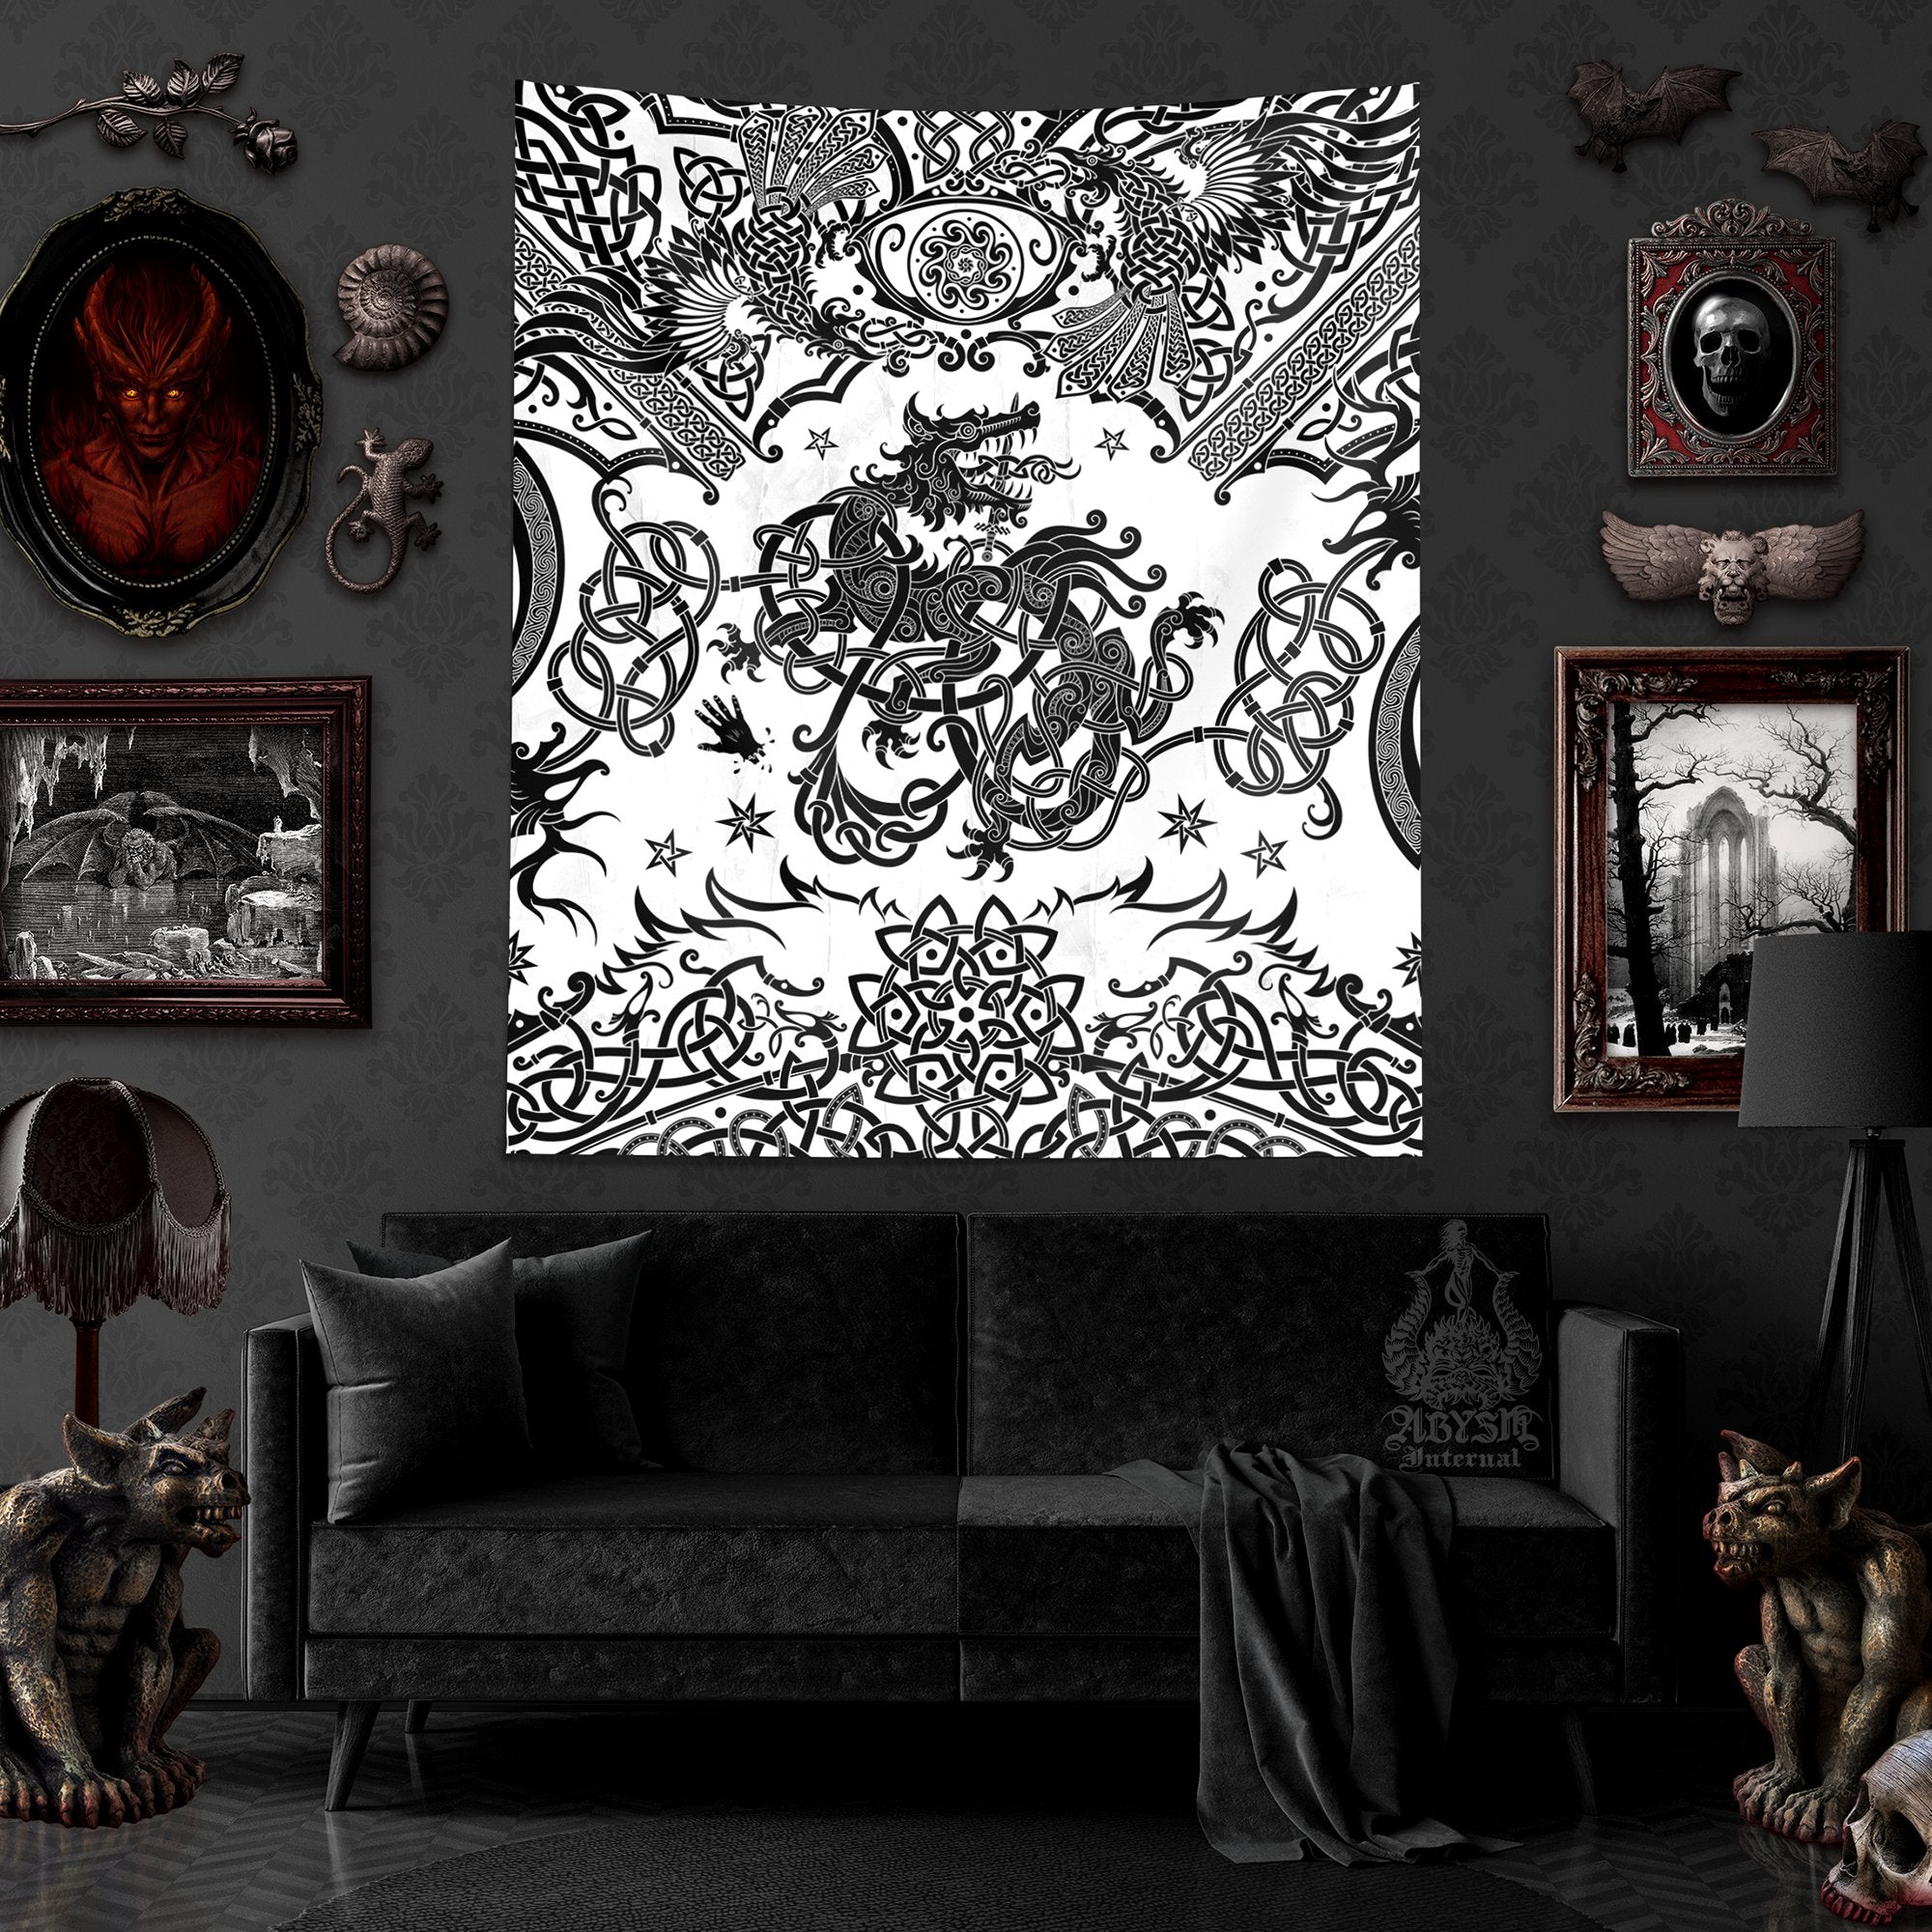 Viking Tapestry, Nordic Wall Hanging, Norse Home Decor, Fenrir Wolf Art, Vertical Print - Black White - Abysm Internal